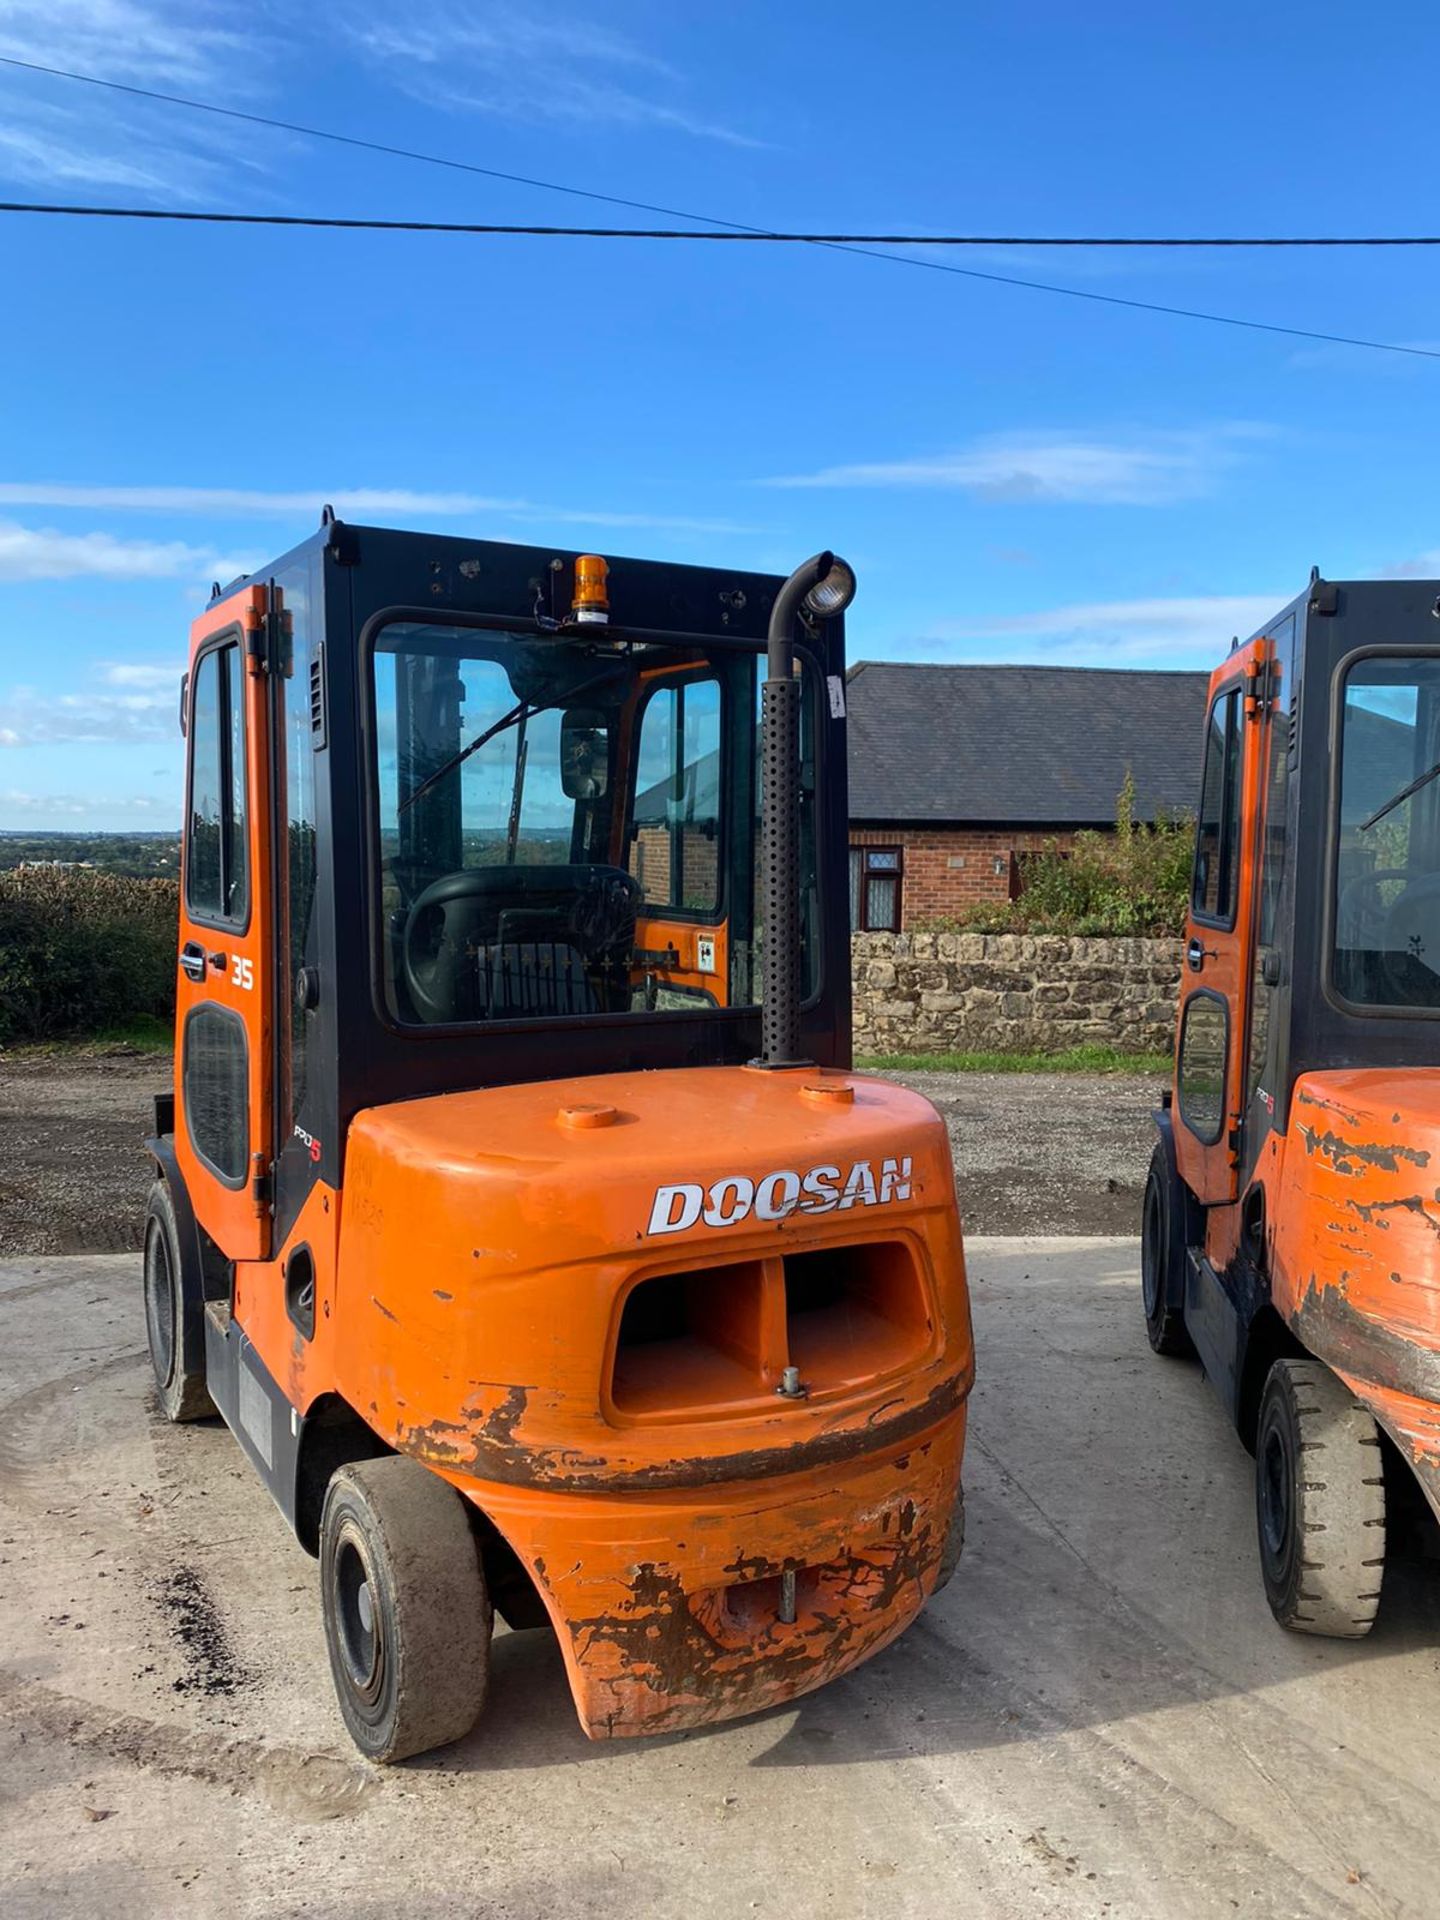 DOOSAN D3.5C-5 3 TON FORKLIFT, FULL GLASS CAB, YEAR 2012, IN GOOD CONDITION, RUNS, WORKS AND LIFTS - Image 4 of 13